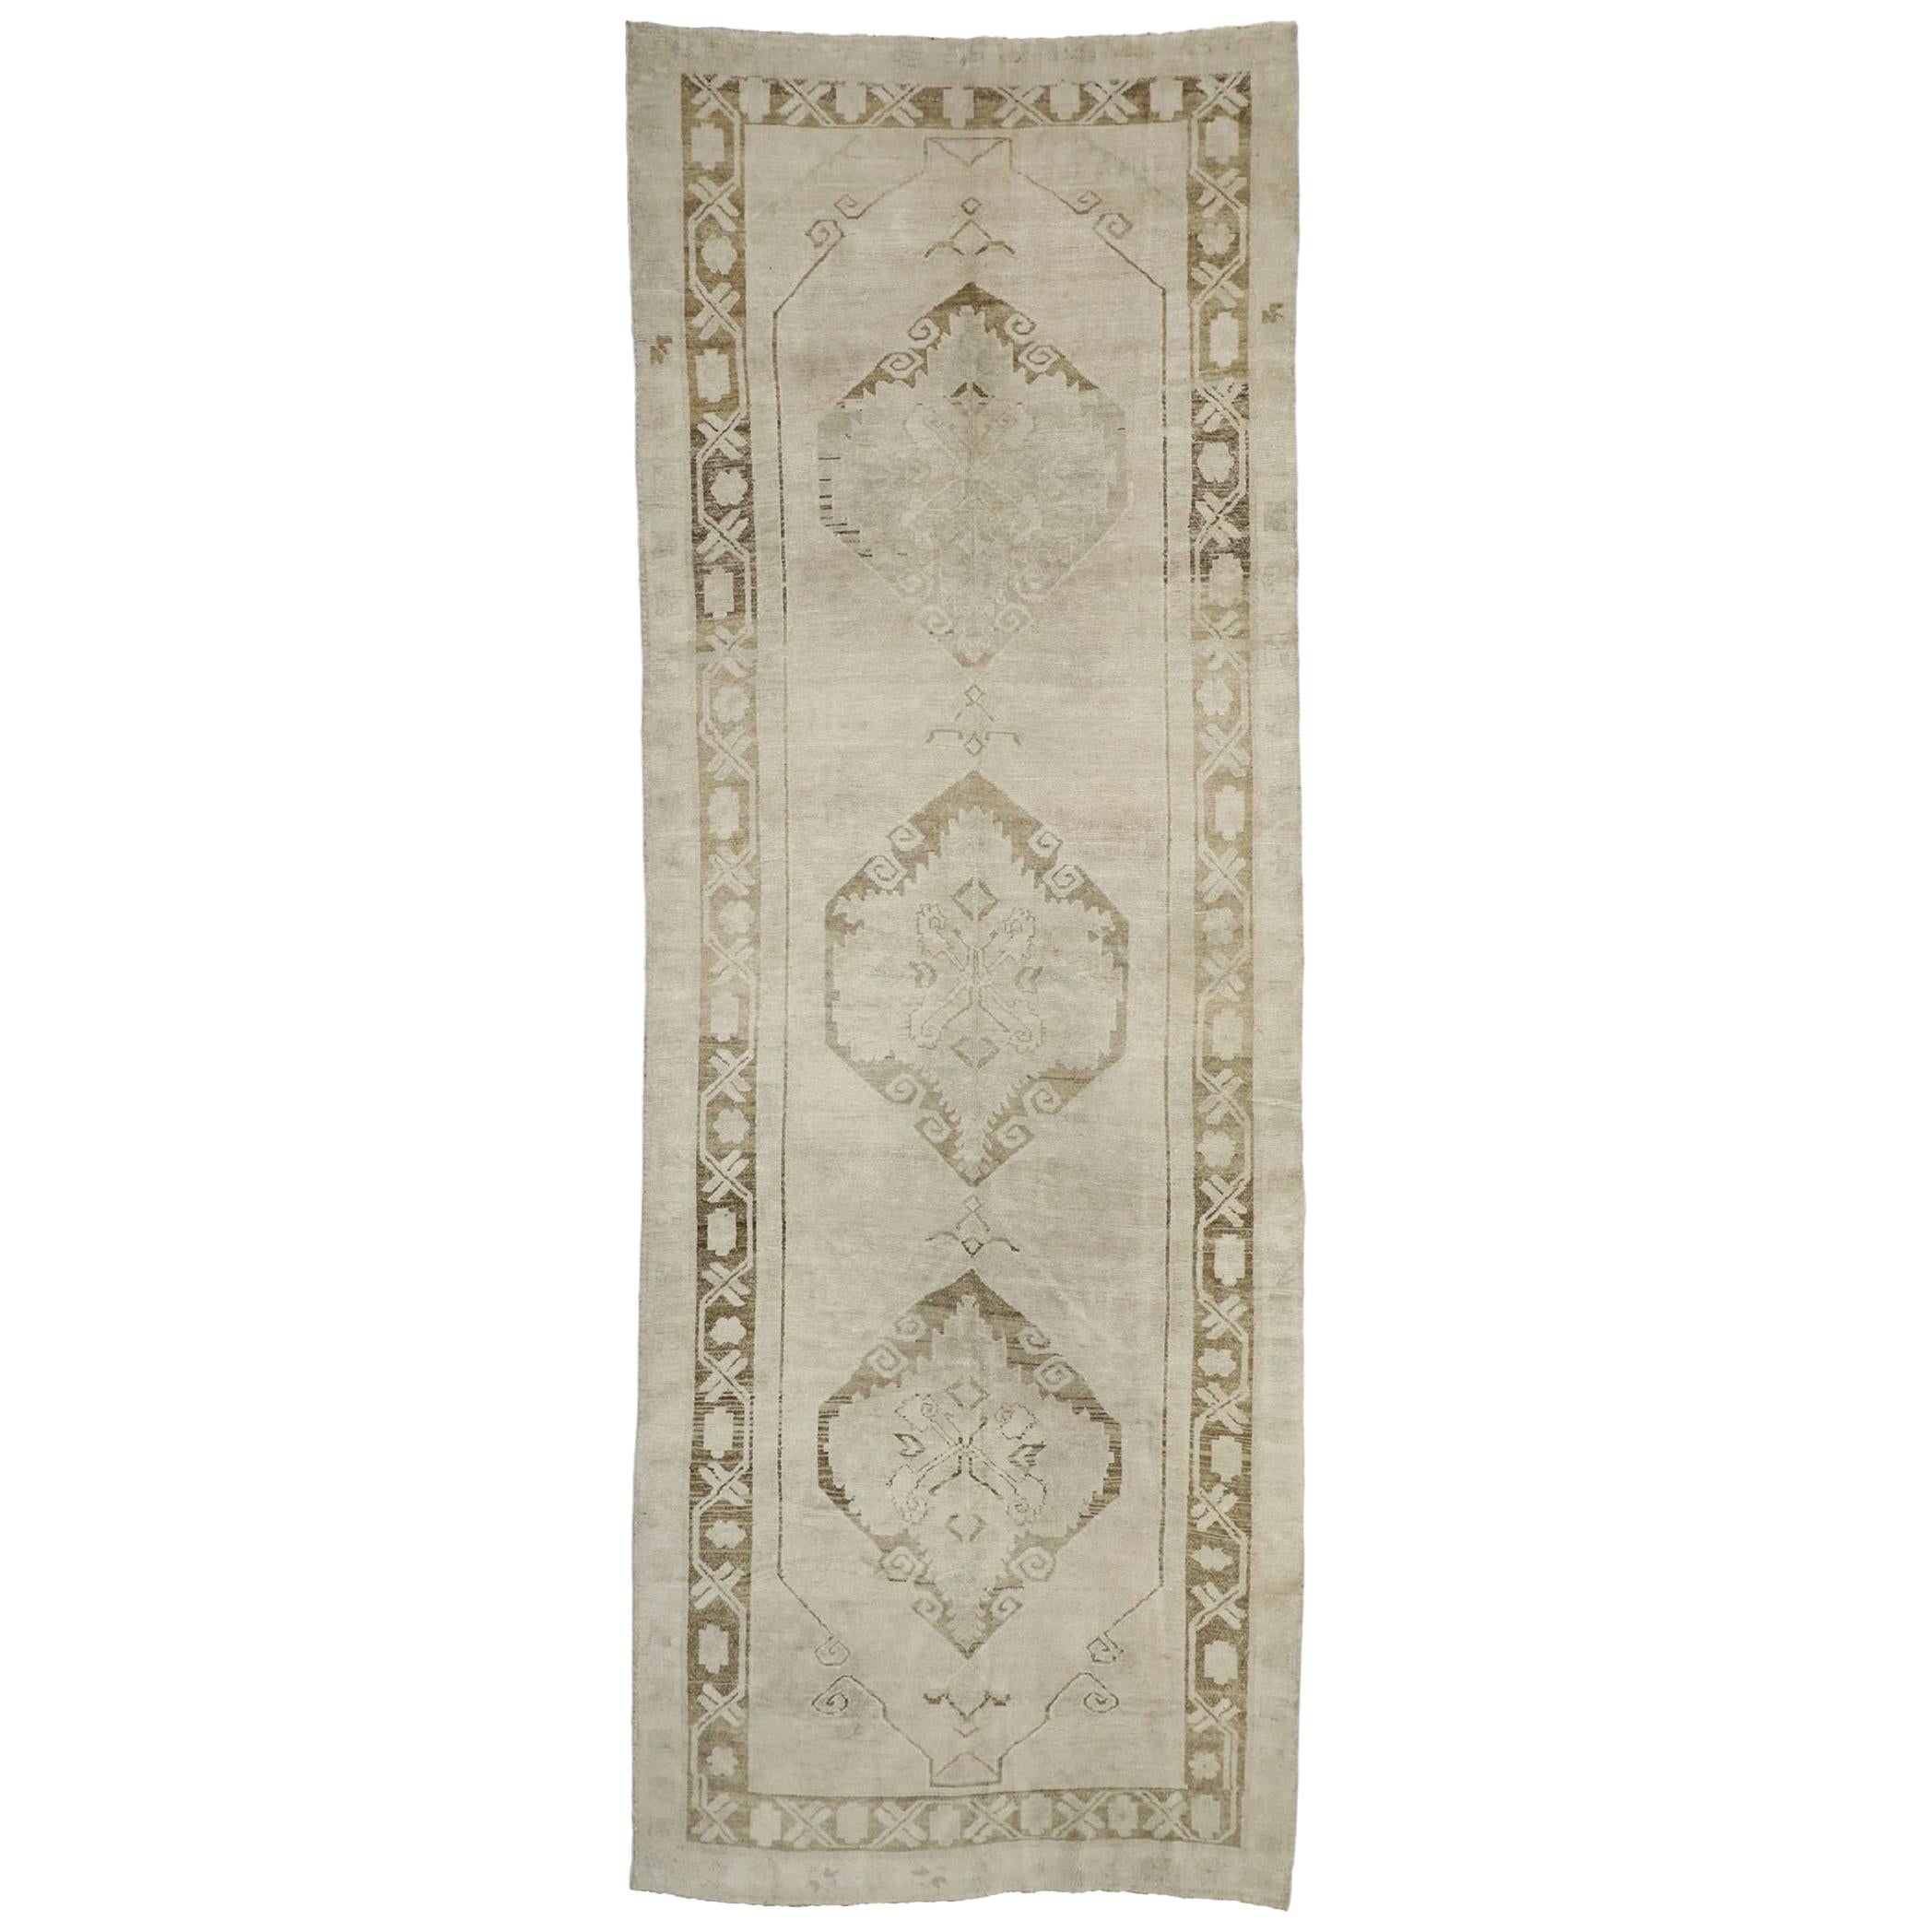 Vintage Turkish Oushak Runner with Mission Style and Warm, Earth-Tones For Sale